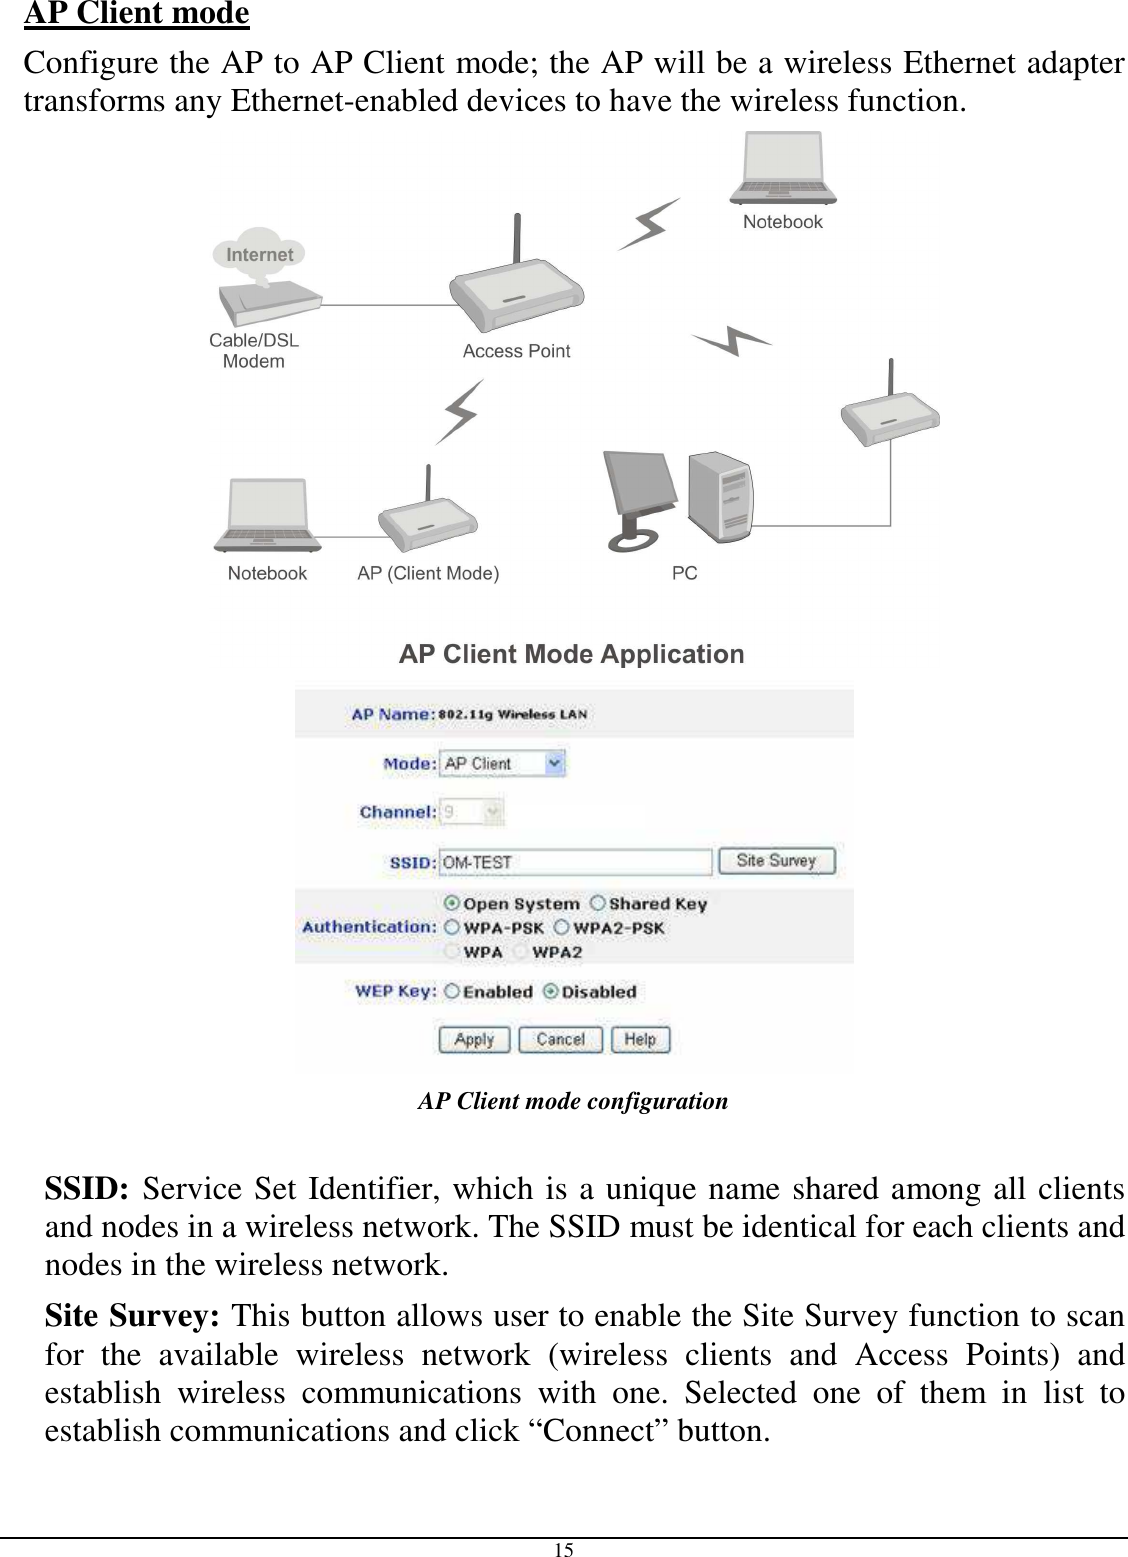  15 AP Client mode  Configure the AP to AP Client mode; the AP will be a wireless Ethernet adapter transforms any Ethernet-enabled devices to have the wireless function.   AP Client mode configuration  SSID: Service Set Identifier, which is a unique name shared among all clients and nodes in a wireless network. The SSID must be identical for each clients and nodes in the wireless network. Site Survey: This button allows user to enable the Site Survey function to scan for  the  available  wireless  network  (wireless  clients  and  Access  Points)  and establish  wireless  communications  with  one.  Selected  one  of  them  in  list  to establish communications and click “Connect” button. 